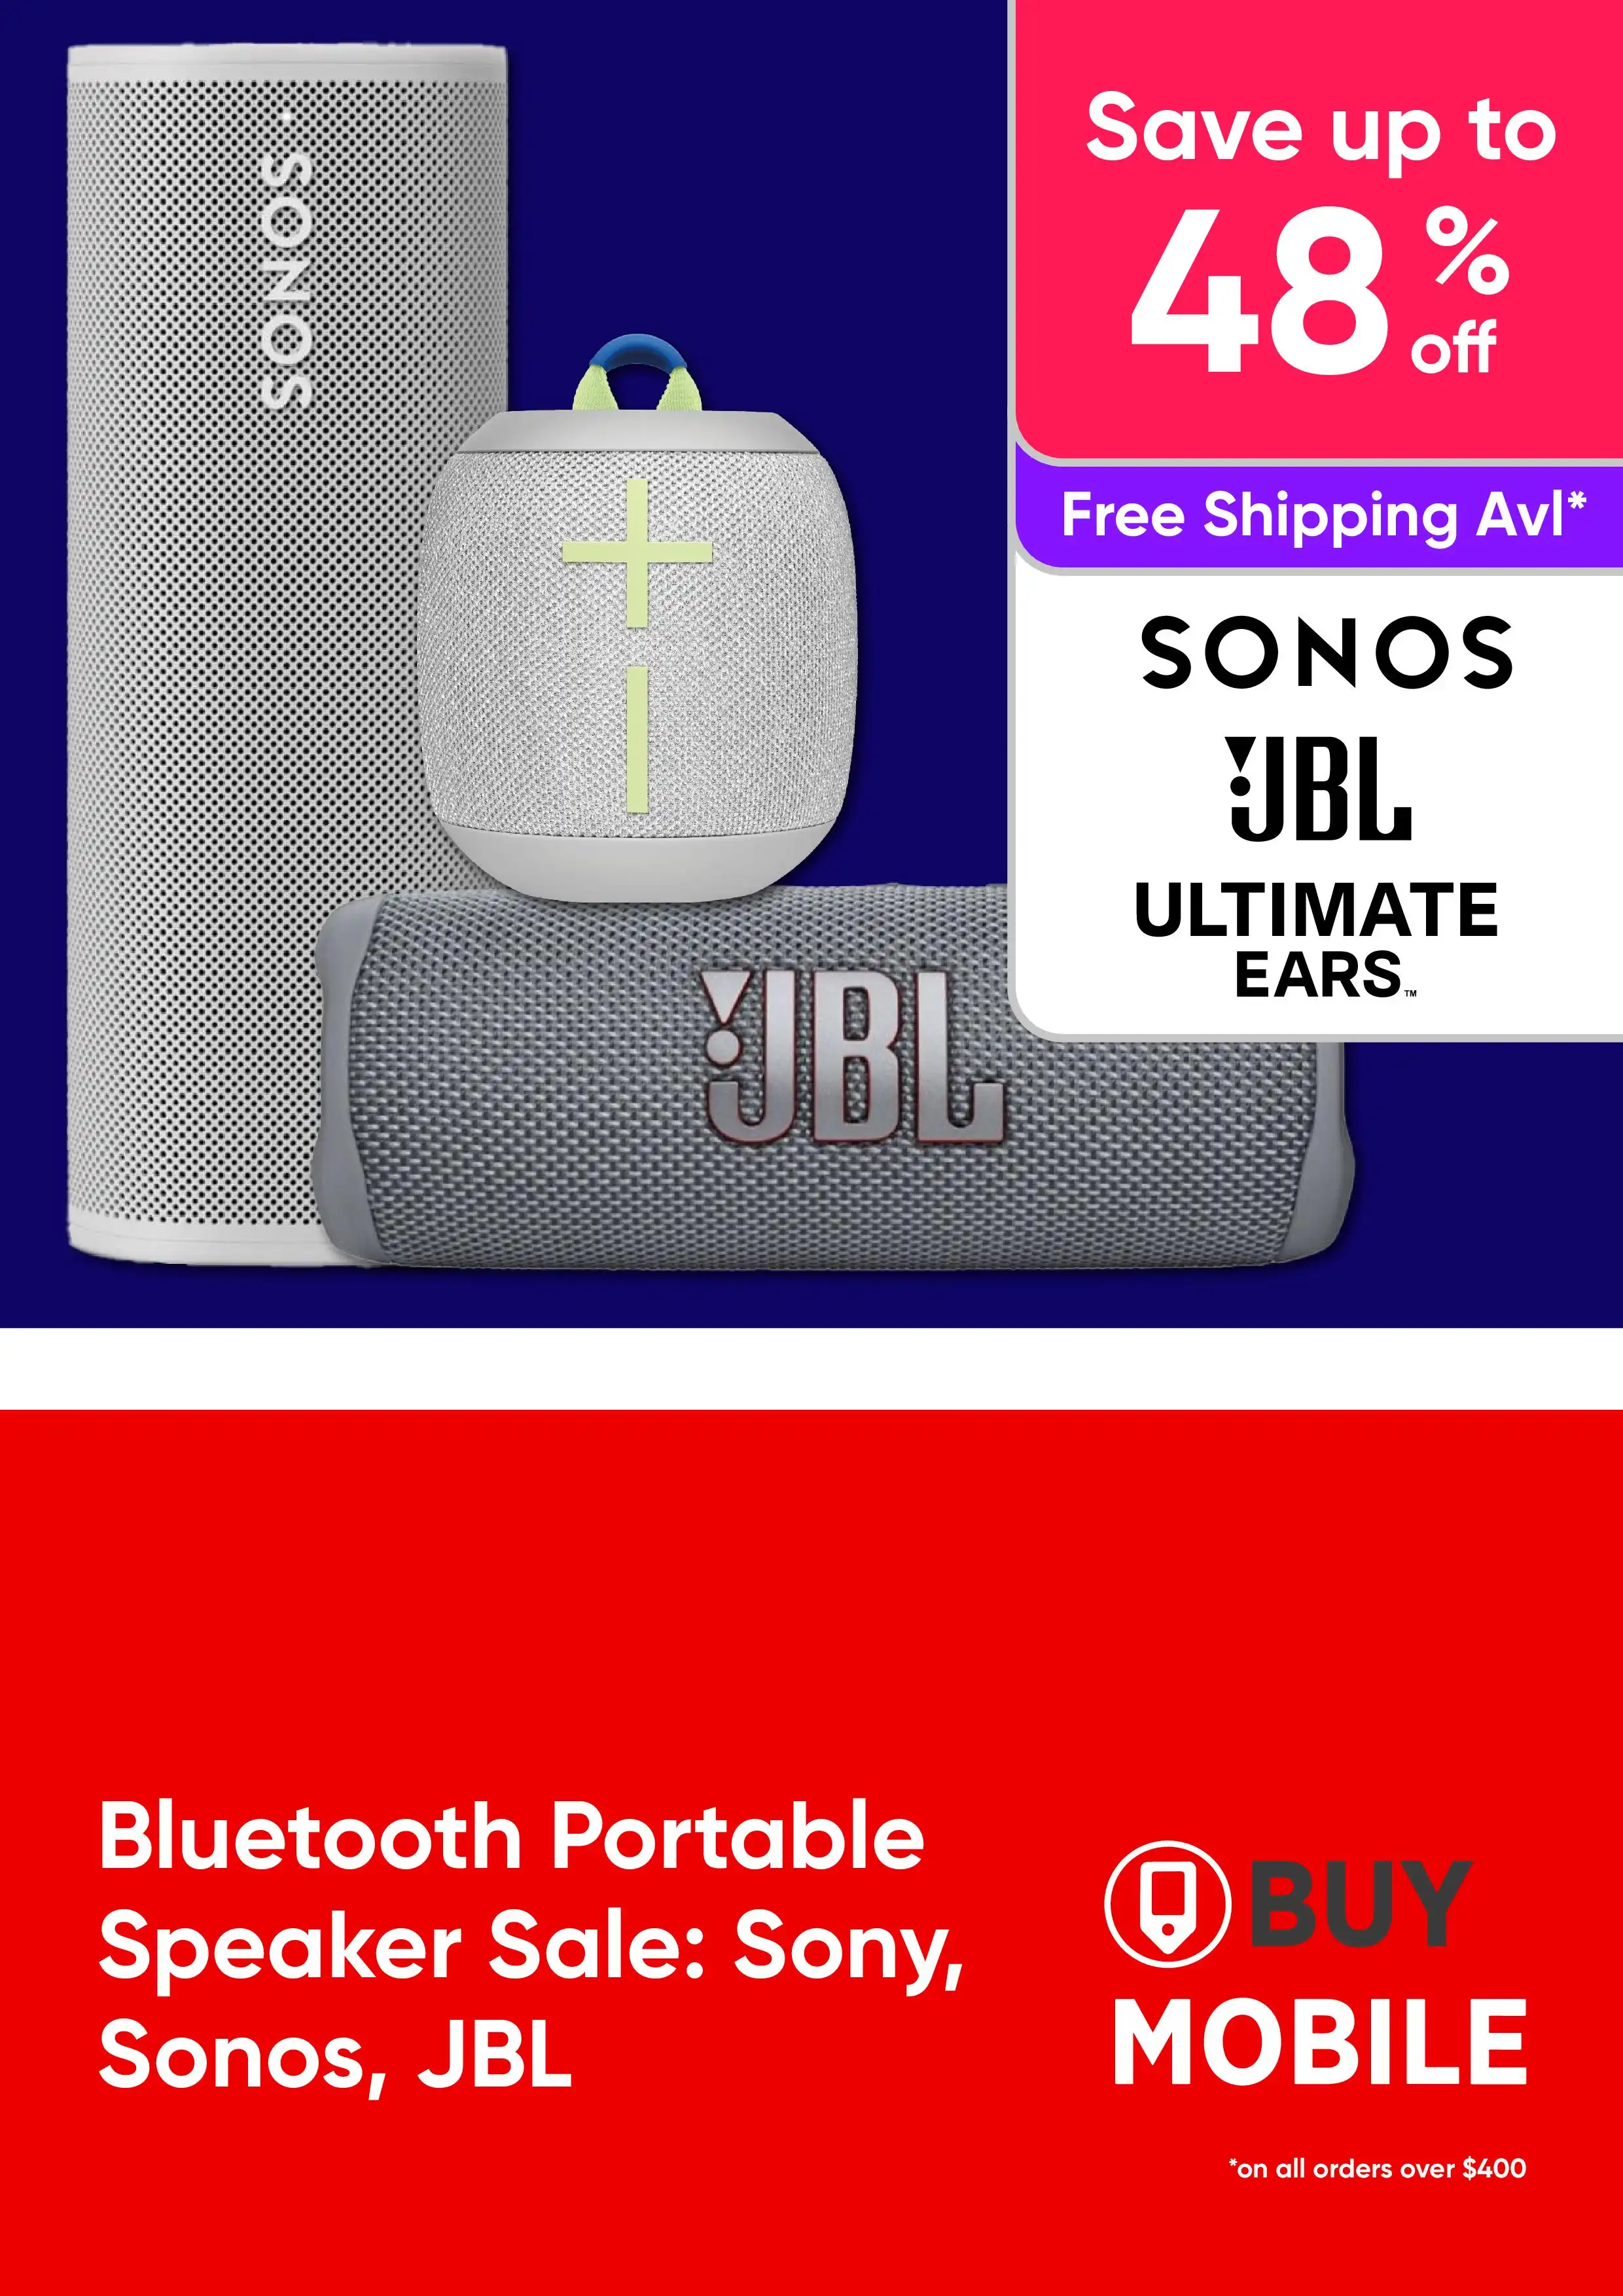 Bluetooth Portable Speaker Sale: Sony, Sonos, JBL – up to 48% off